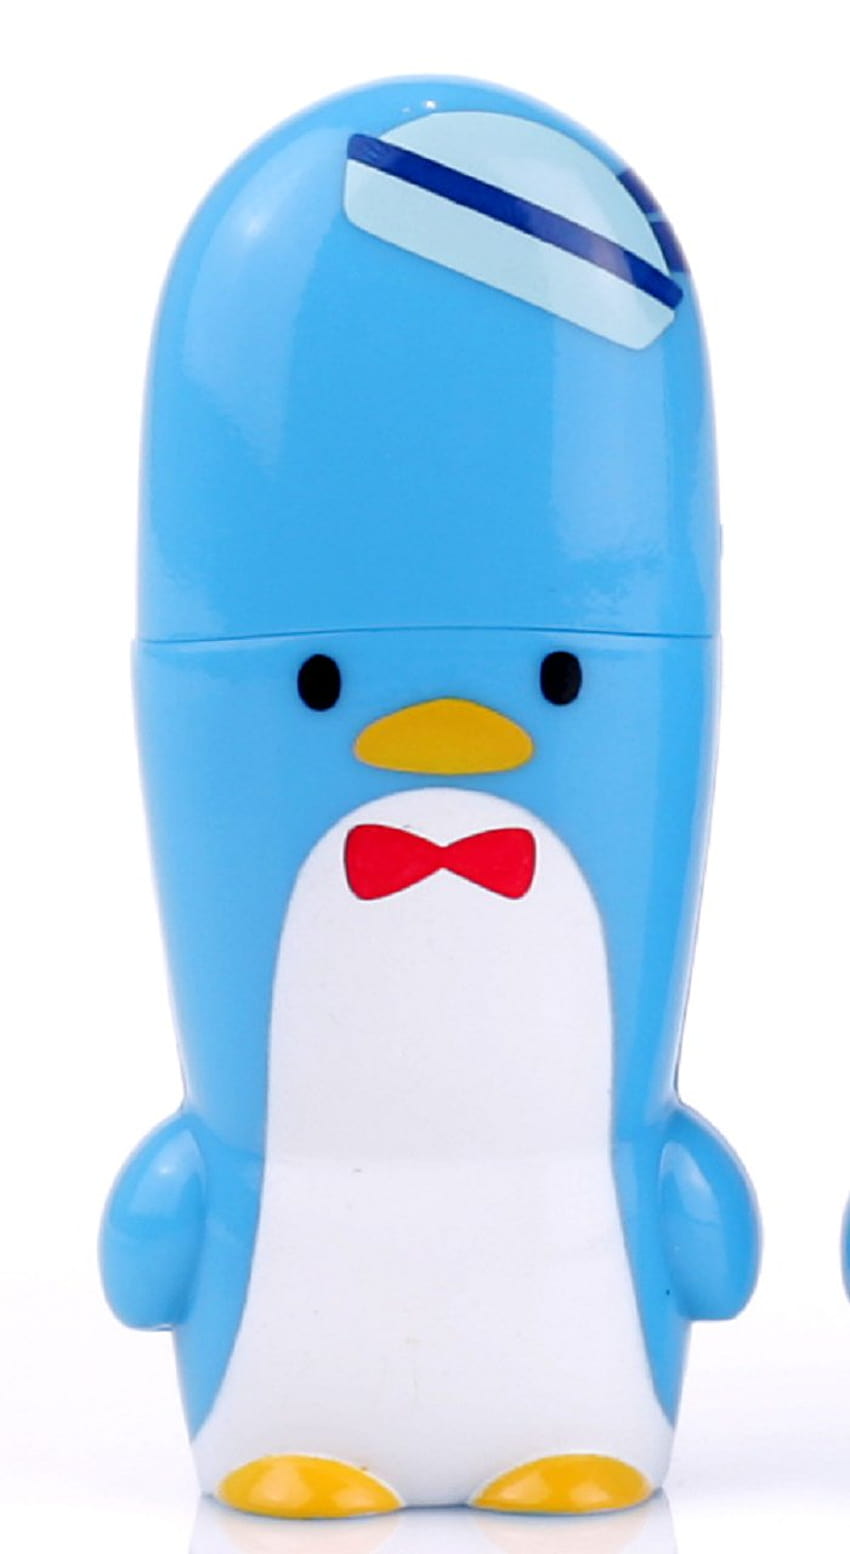 32GB 3.0 Tuxedo Sam MIMOBOT Designer USB Flash Drive with bonus preloaded Mimory content, Limited Edition by Mimoco HD phone wallpaper